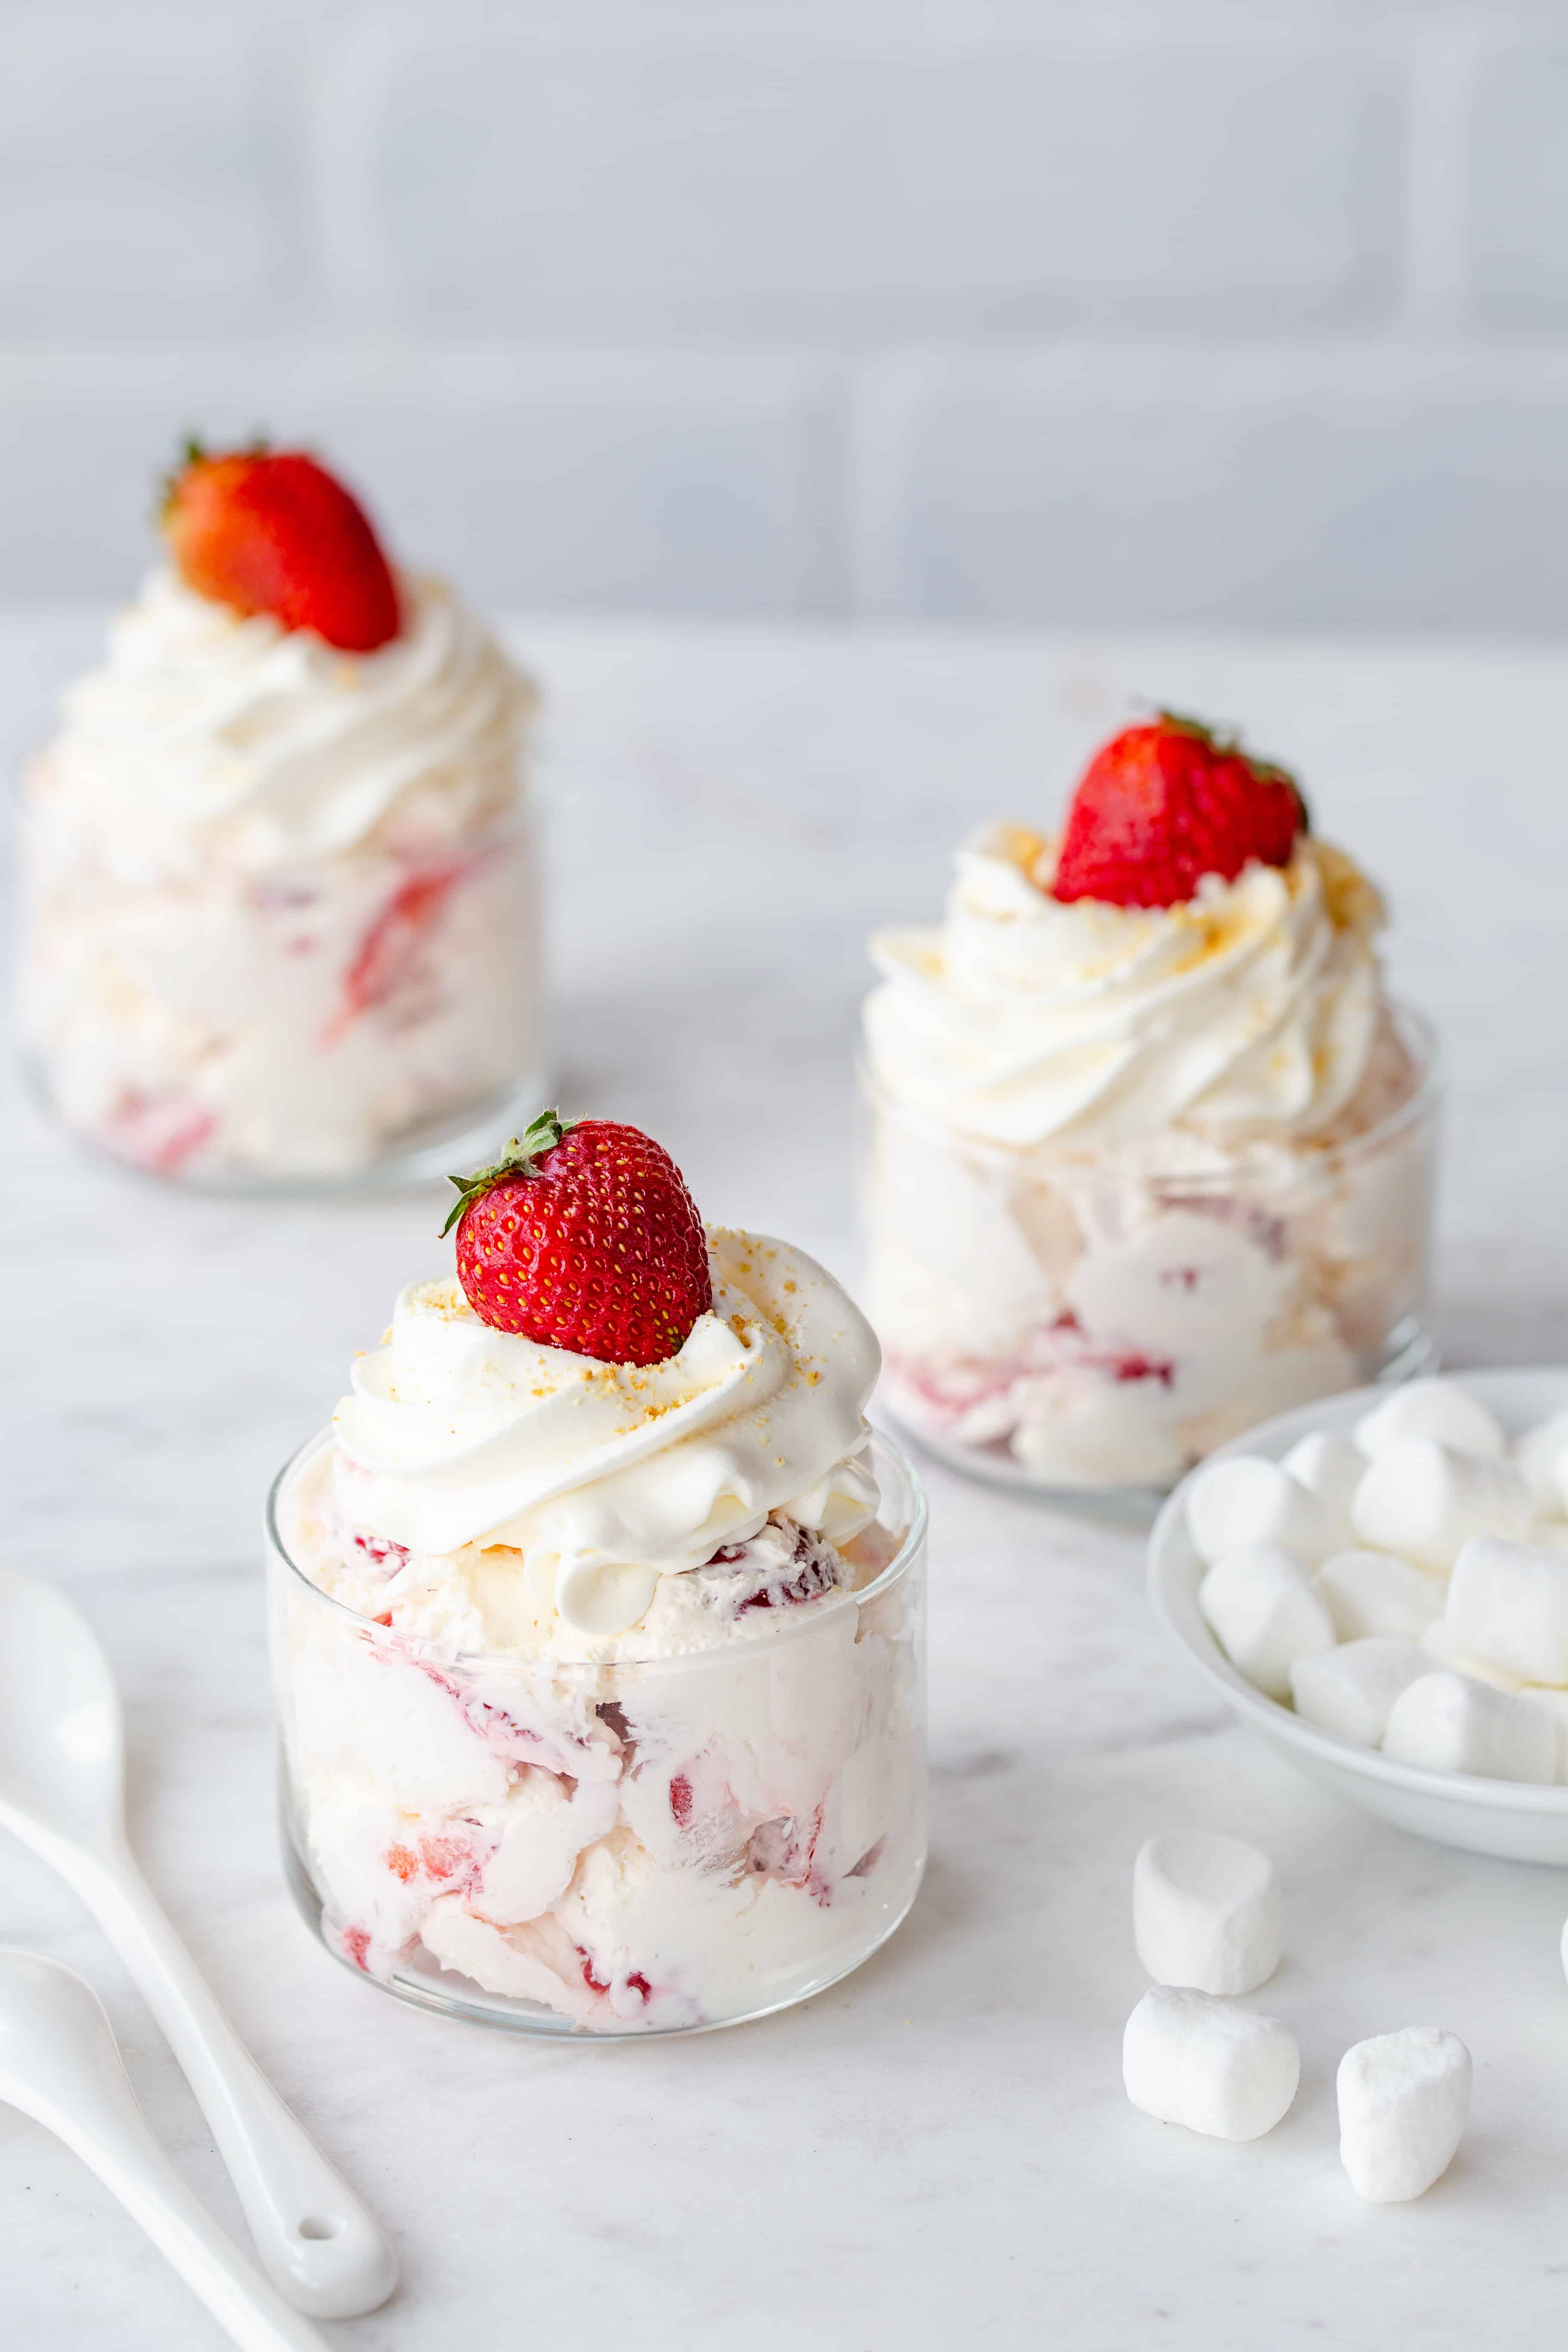 Strawberry Cheesecake Fluff is the perfect dessert for any occasion and comes together in less than 10 minutes! So good!